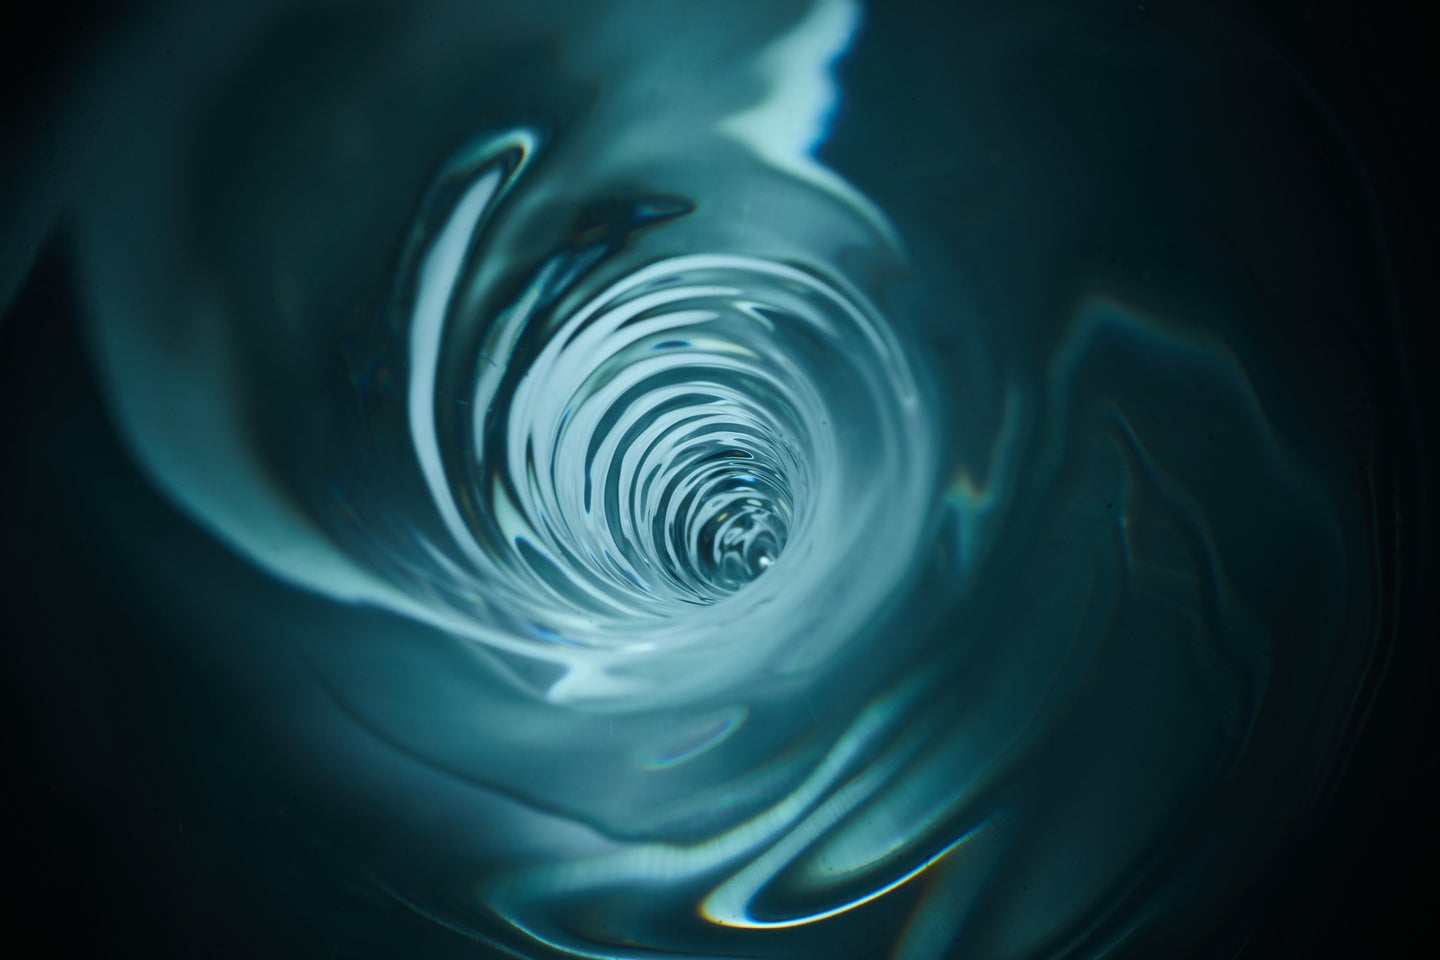 Whirlpool of water to represent a quantum tornado from a physics experiment